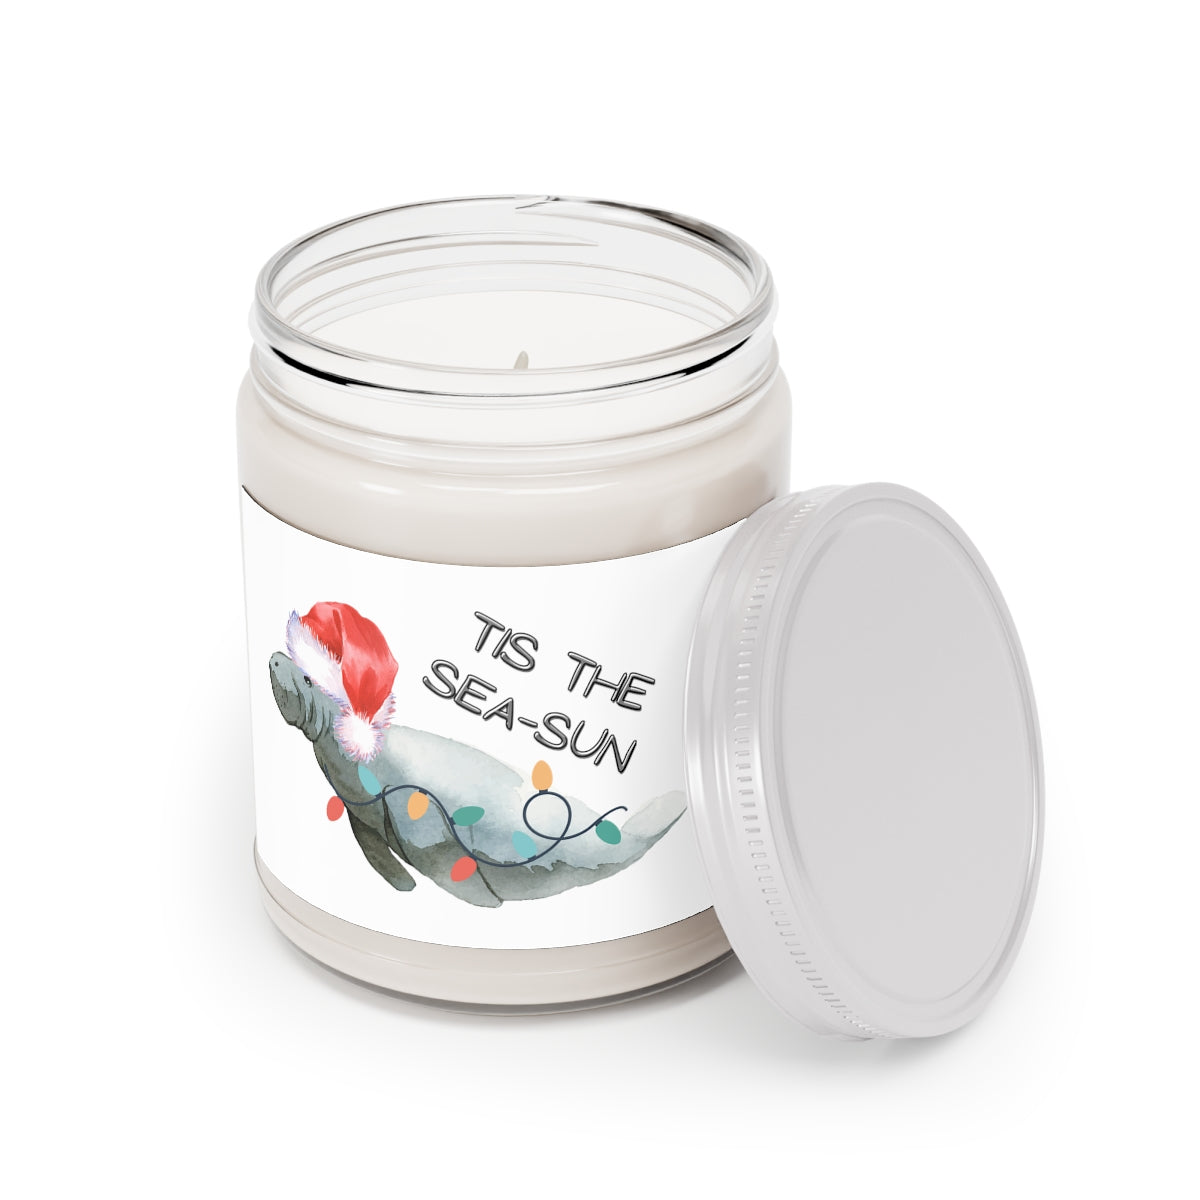 Santa Hat Manatee Spice Candle | Candles 9oz.